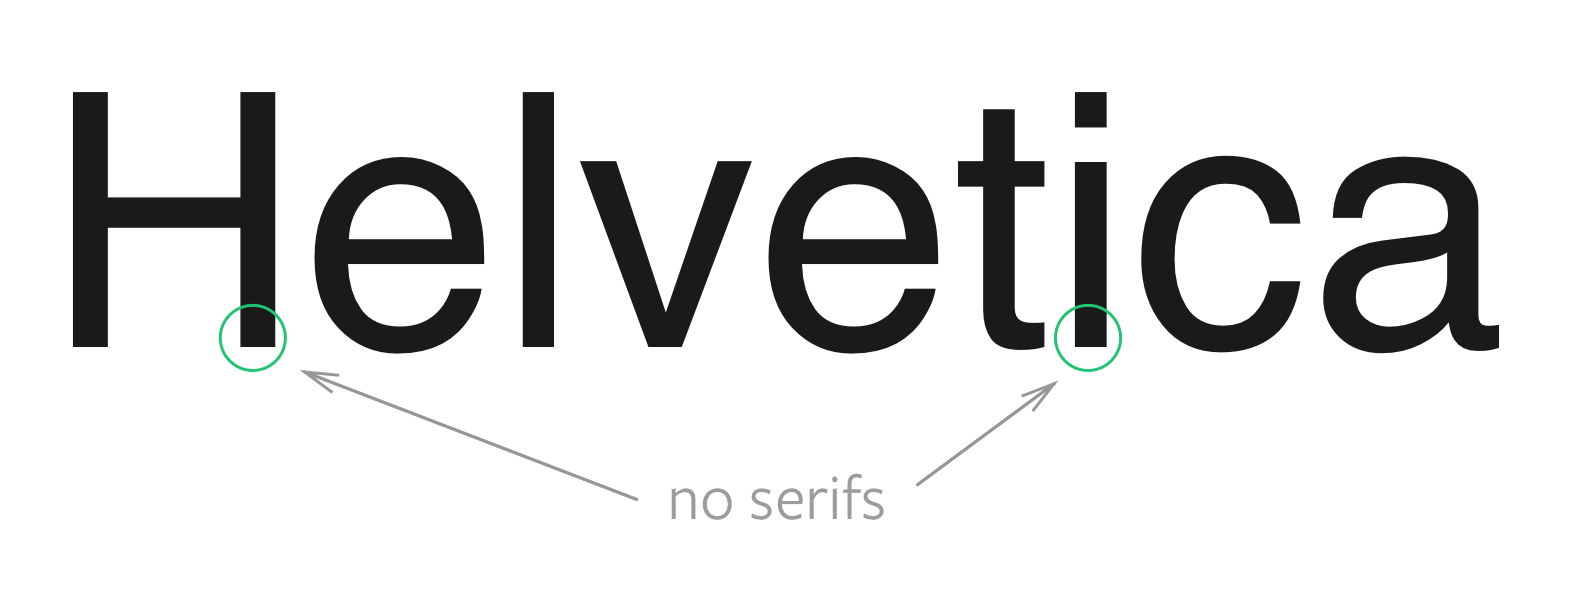 Image of Helvetica typeface that contains no serifs